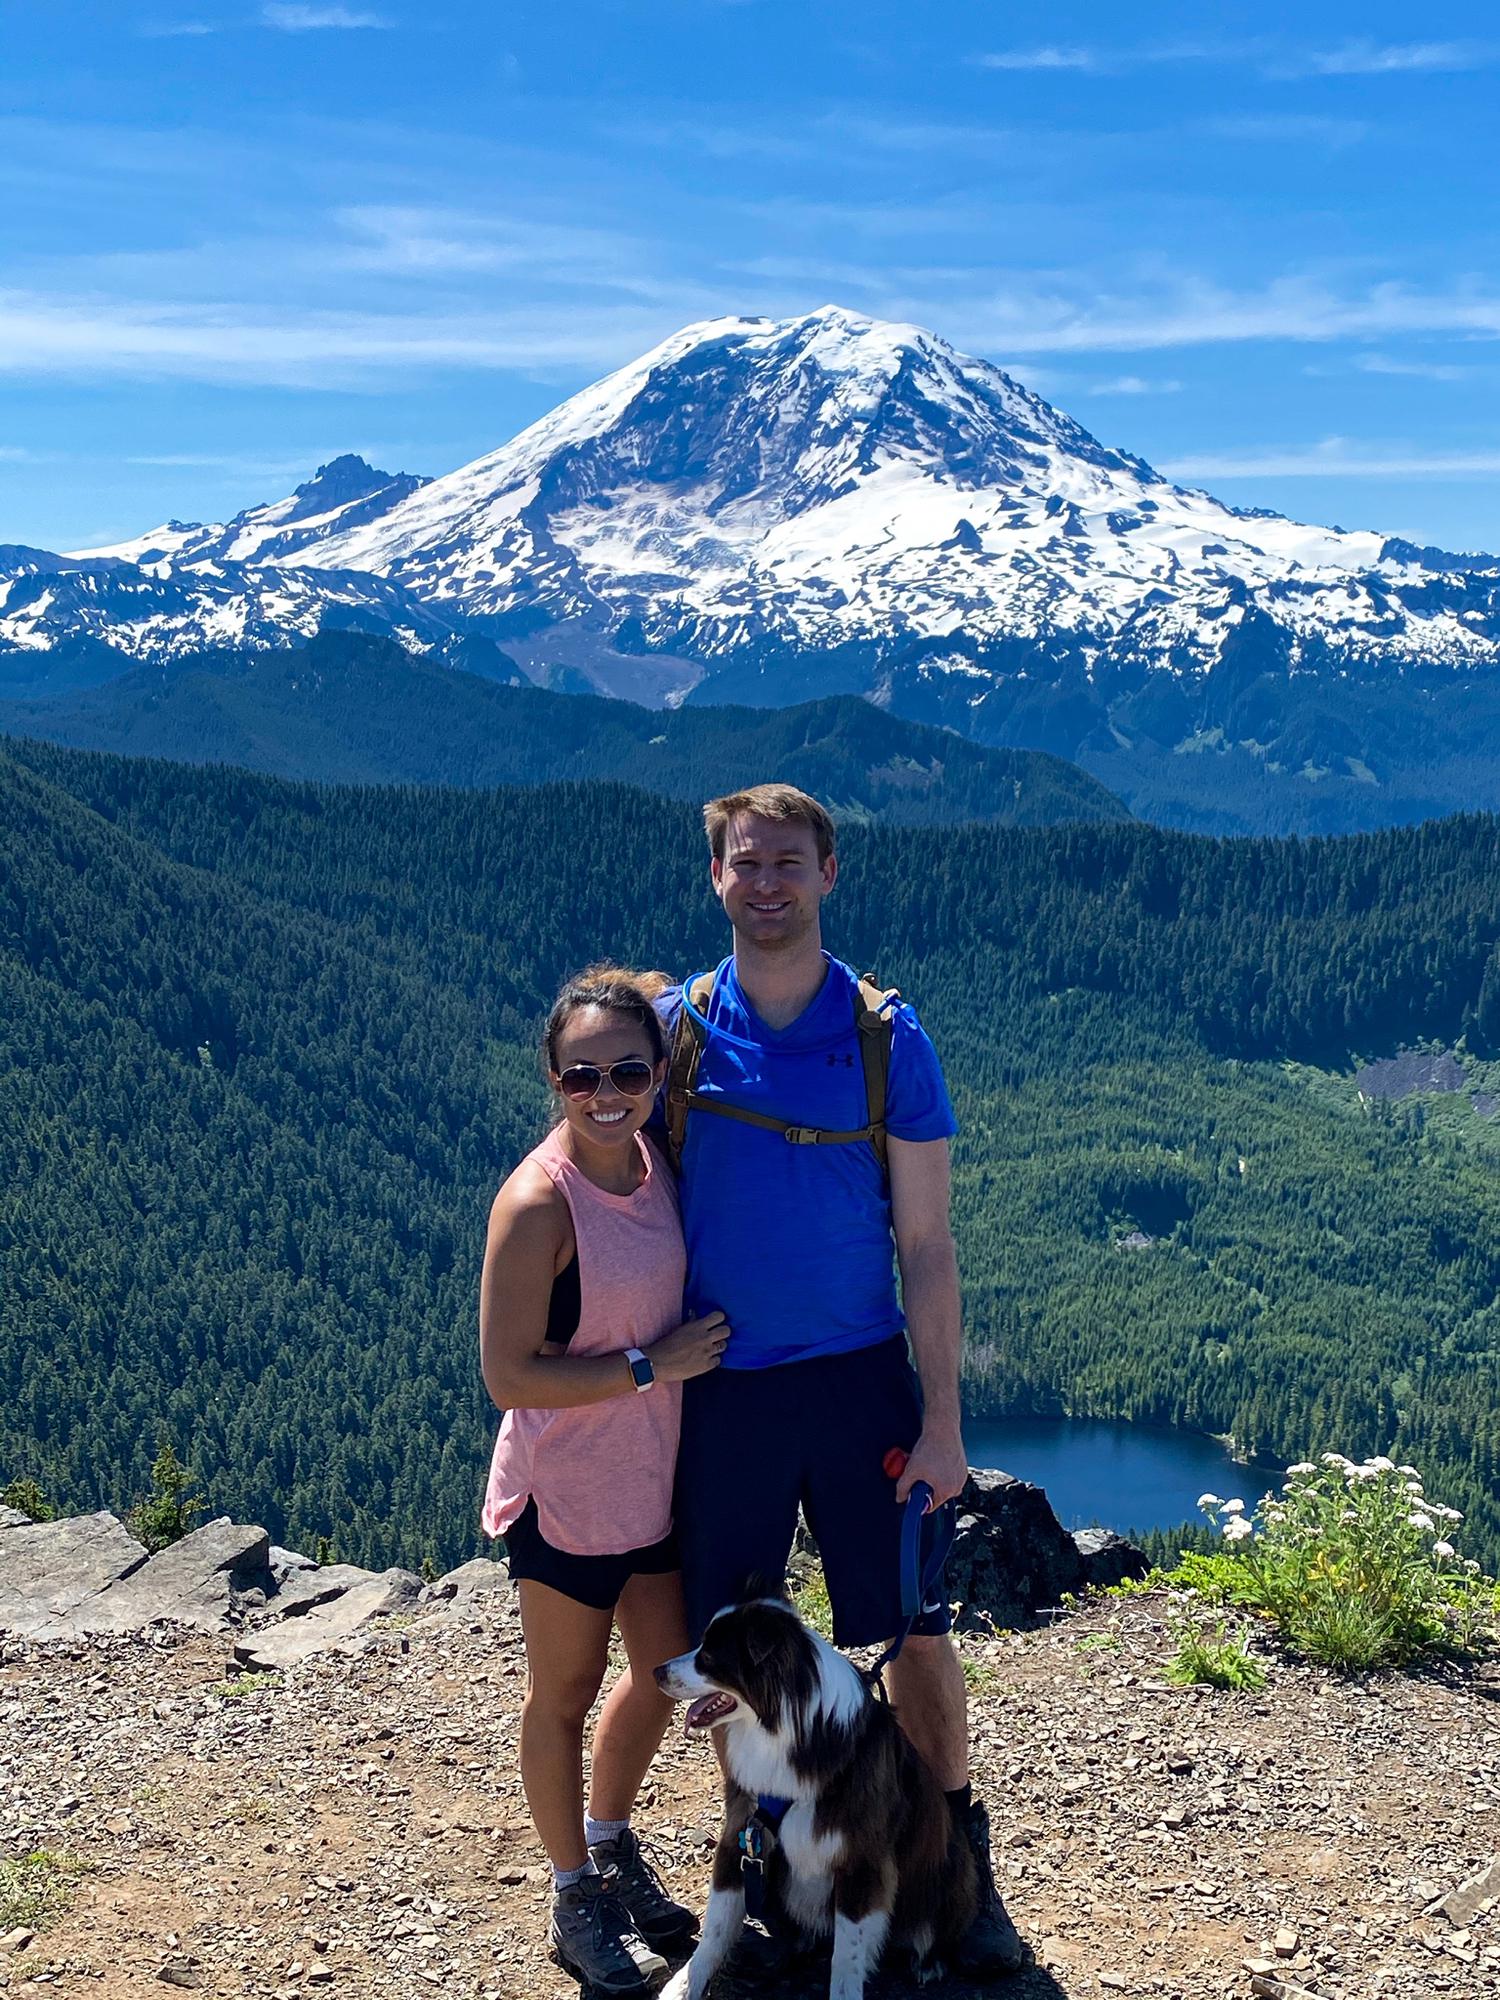 Family picture with Mt. Rainier in the background. 2020.